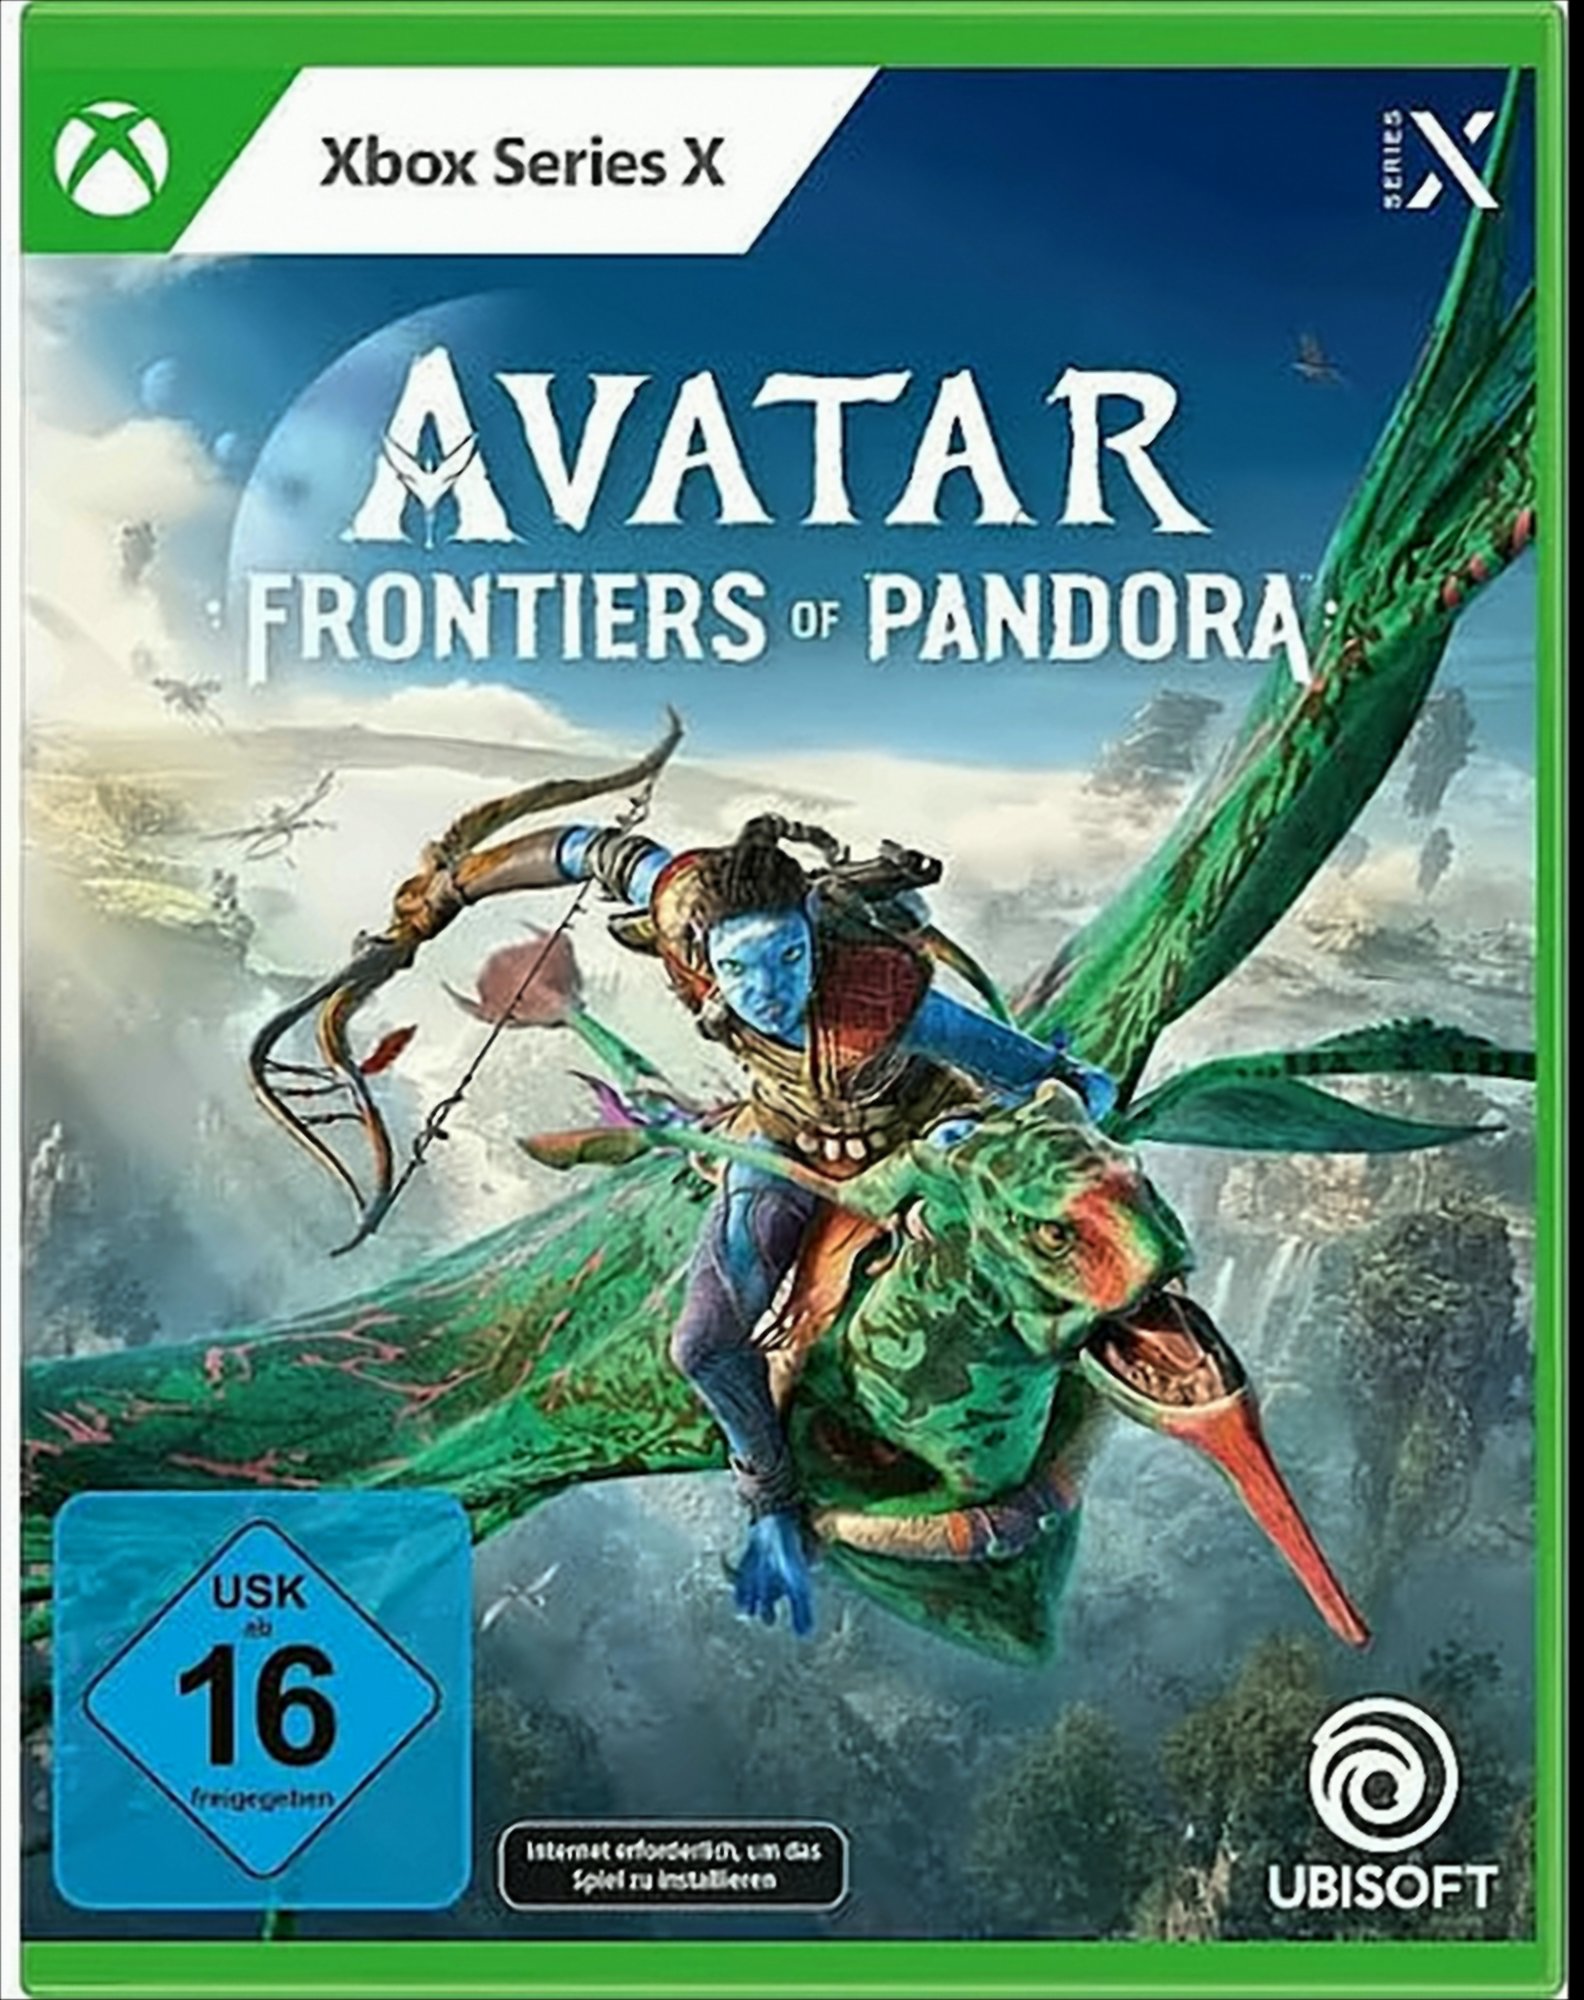 Avatar XBSX Frontiers of Pandora